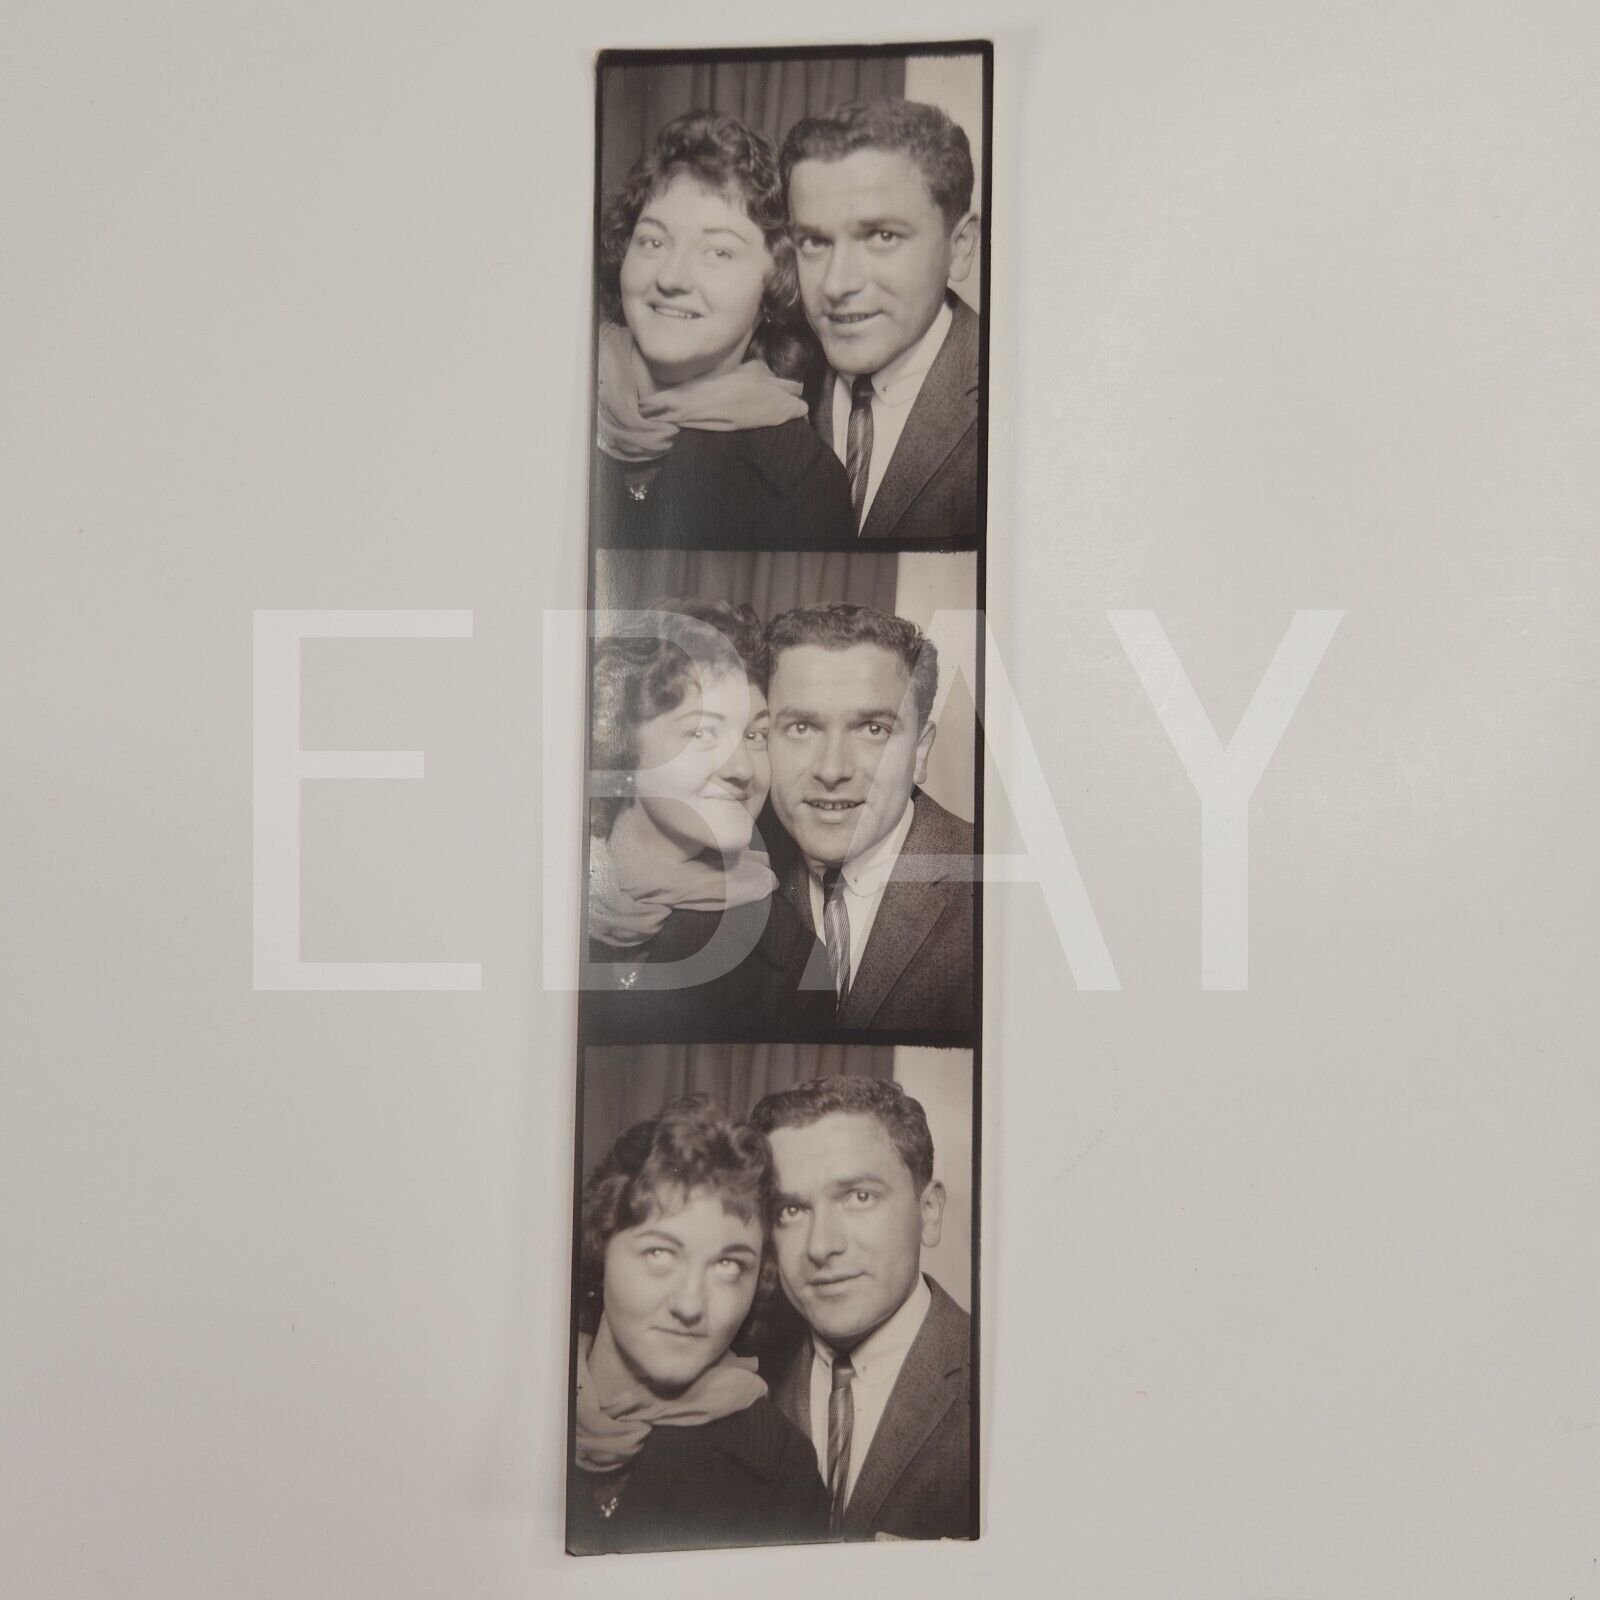 Old Photo Snapshot Lovely Couple Vintage Portrait In An Arcade Photo Booth A37